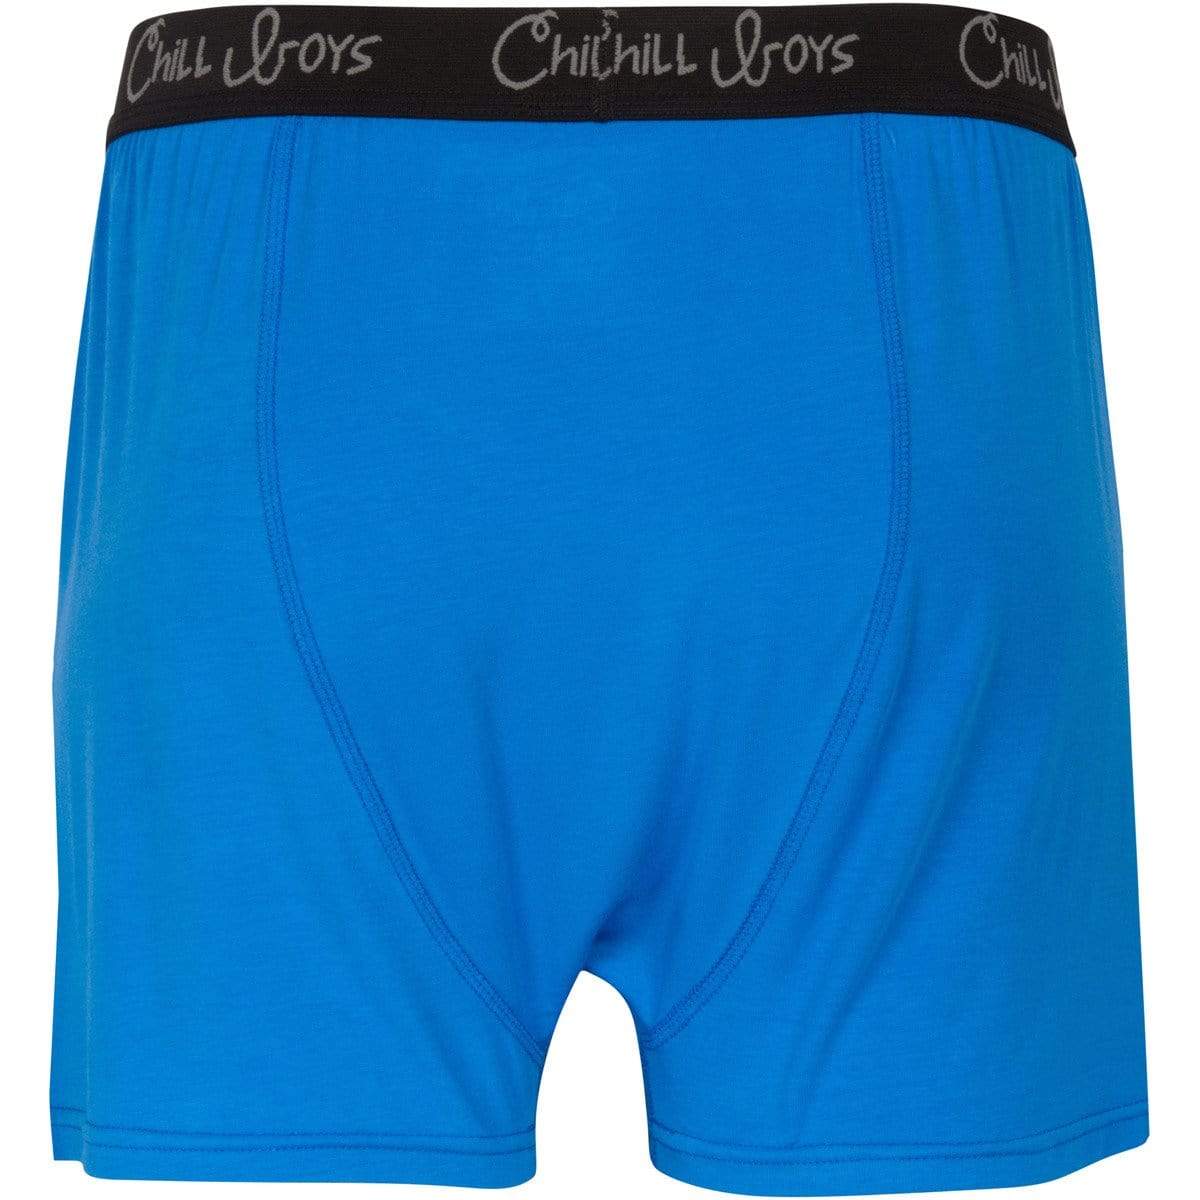 Comfortable Mens Boxers Breathable Moisture Wicking Underwear by Chill Boys